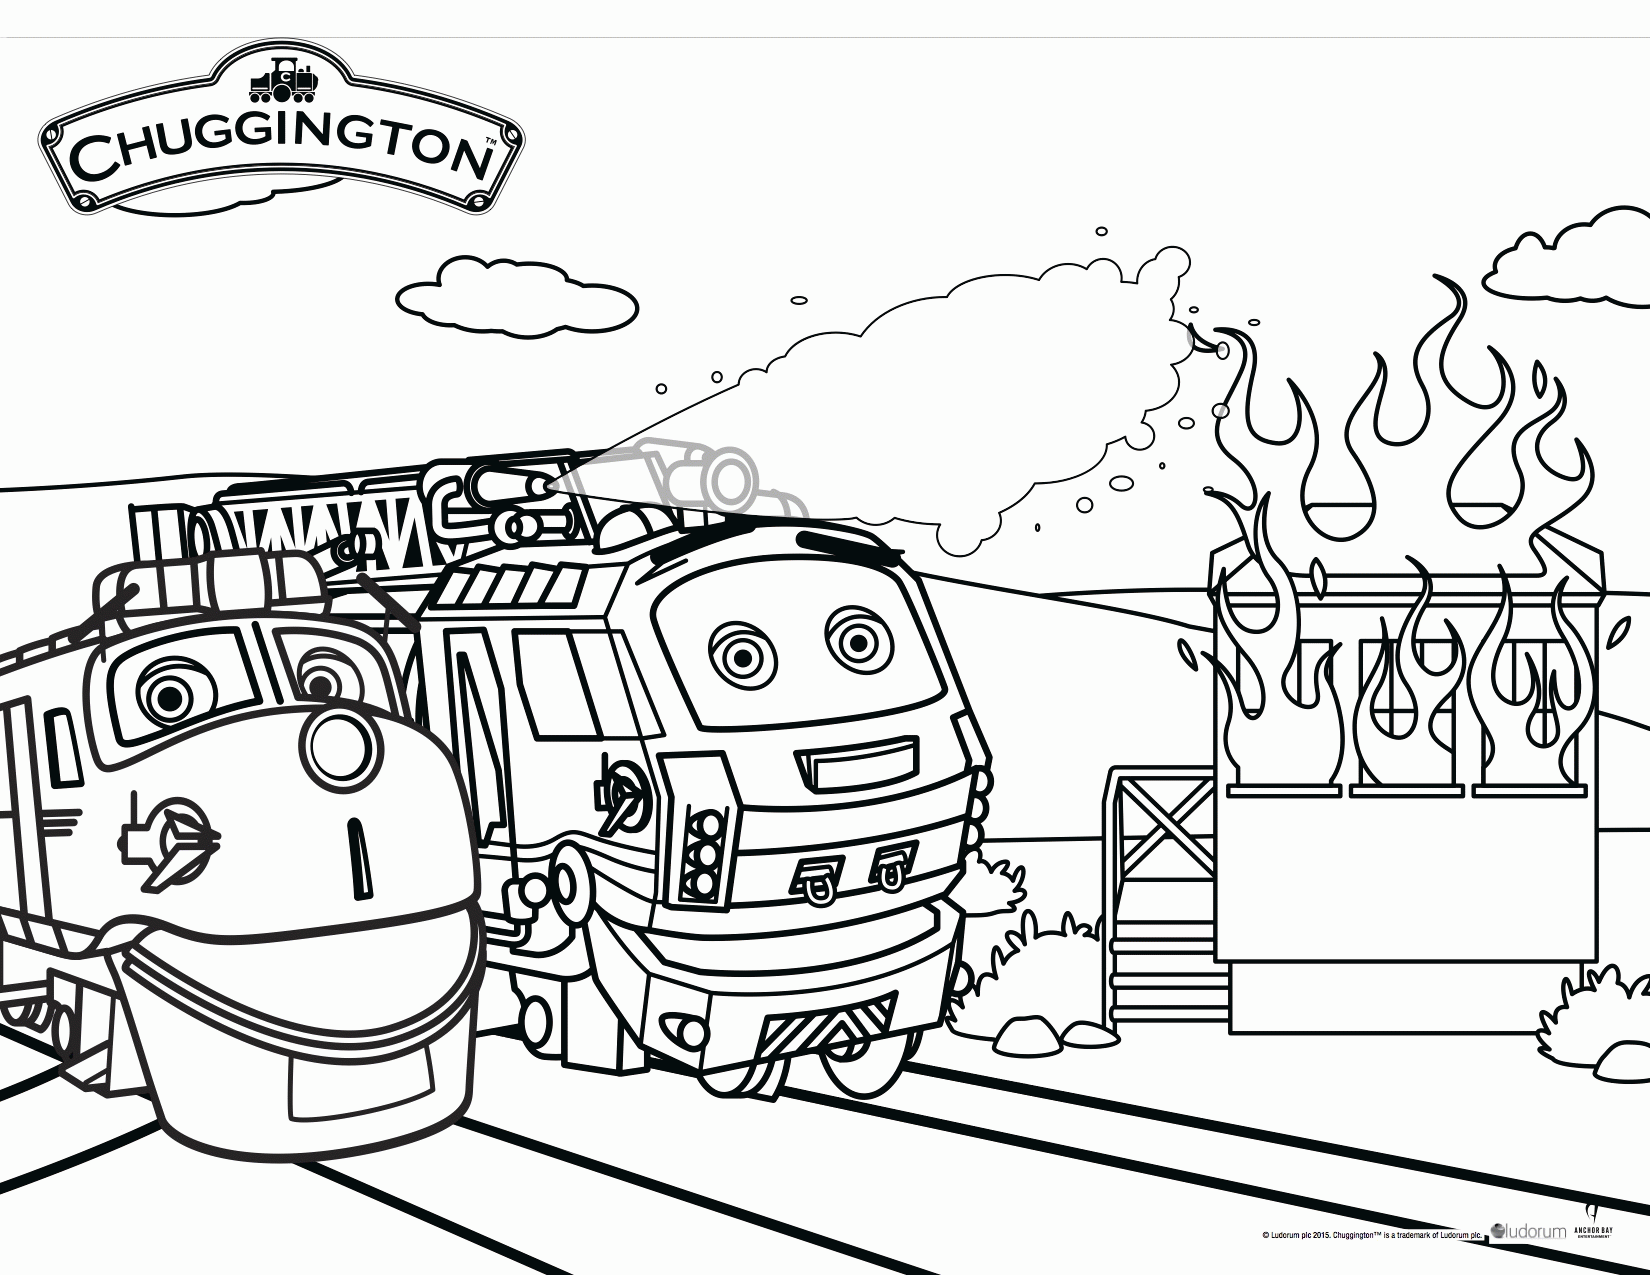 Chuggington coloring pages to download and print for free